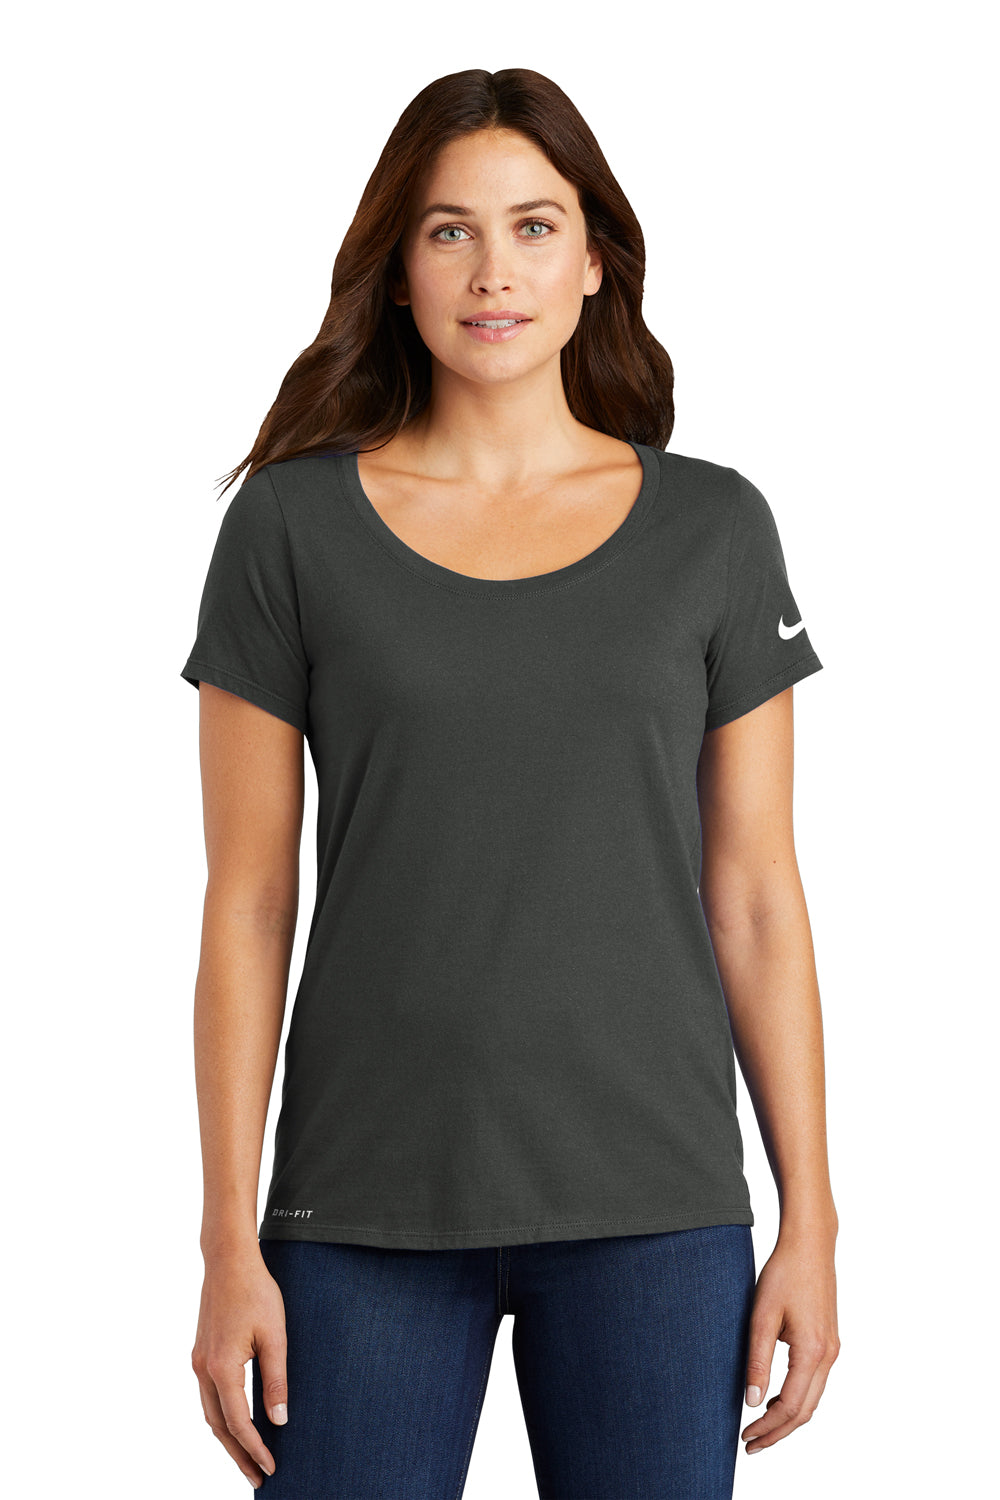 Nike NKBQ5234 Womens Dri-Fit Moisture Wicking Short Sleeve Scoop Neck T-Shirt Anthracite Grey Model Front